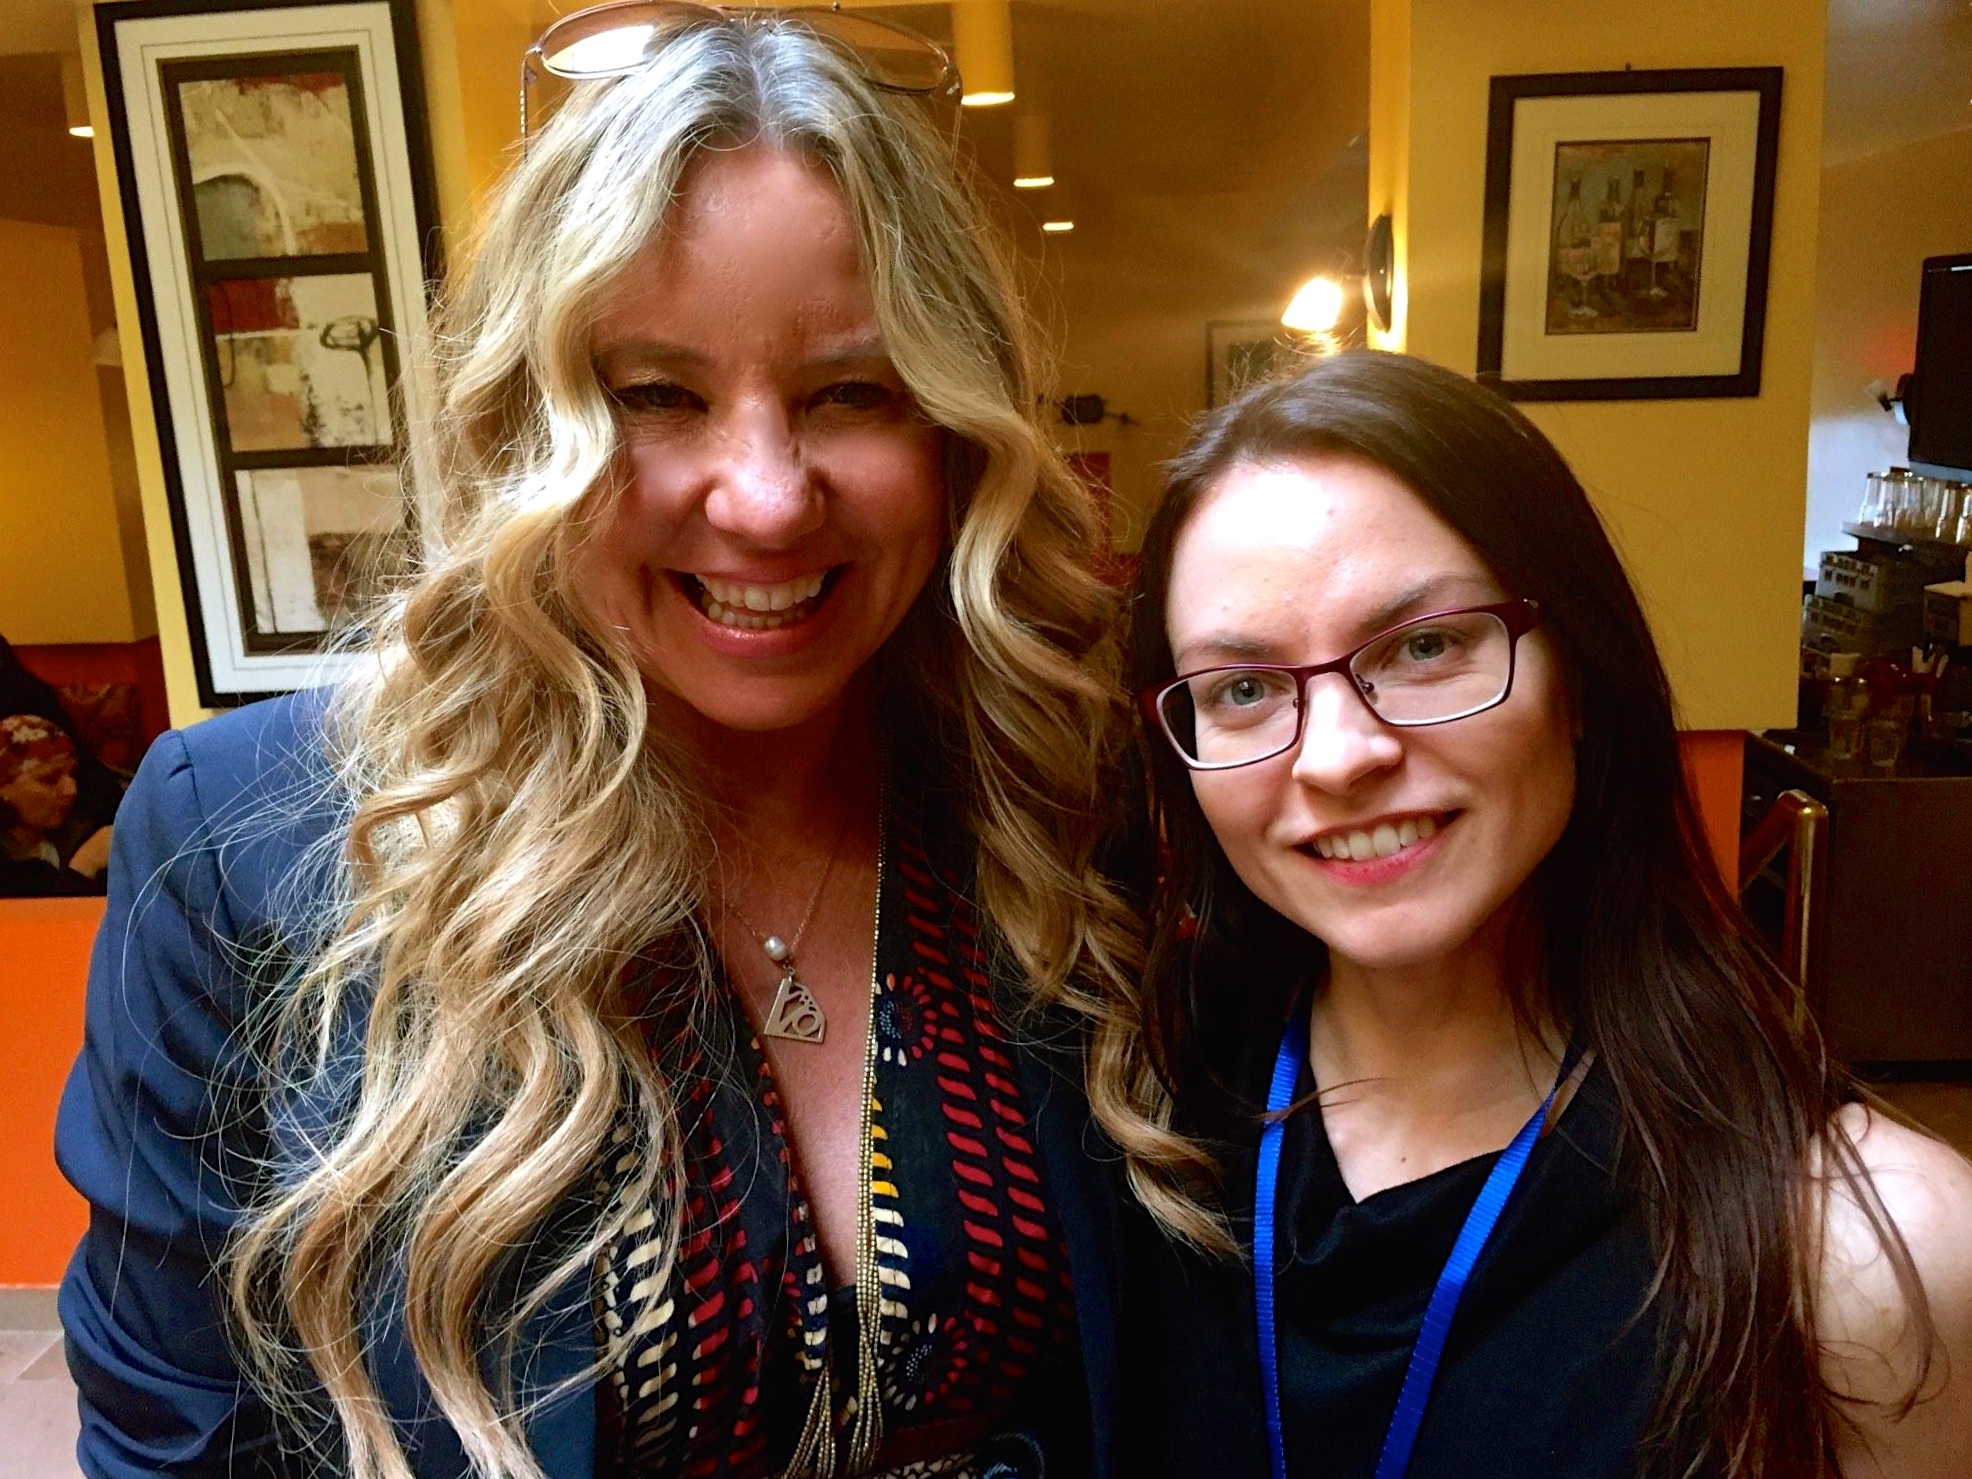 OneMama.org's Siobhan Neilland with the 50 Women Project's Jessica Buchleitner at the CSW 59 in 2015